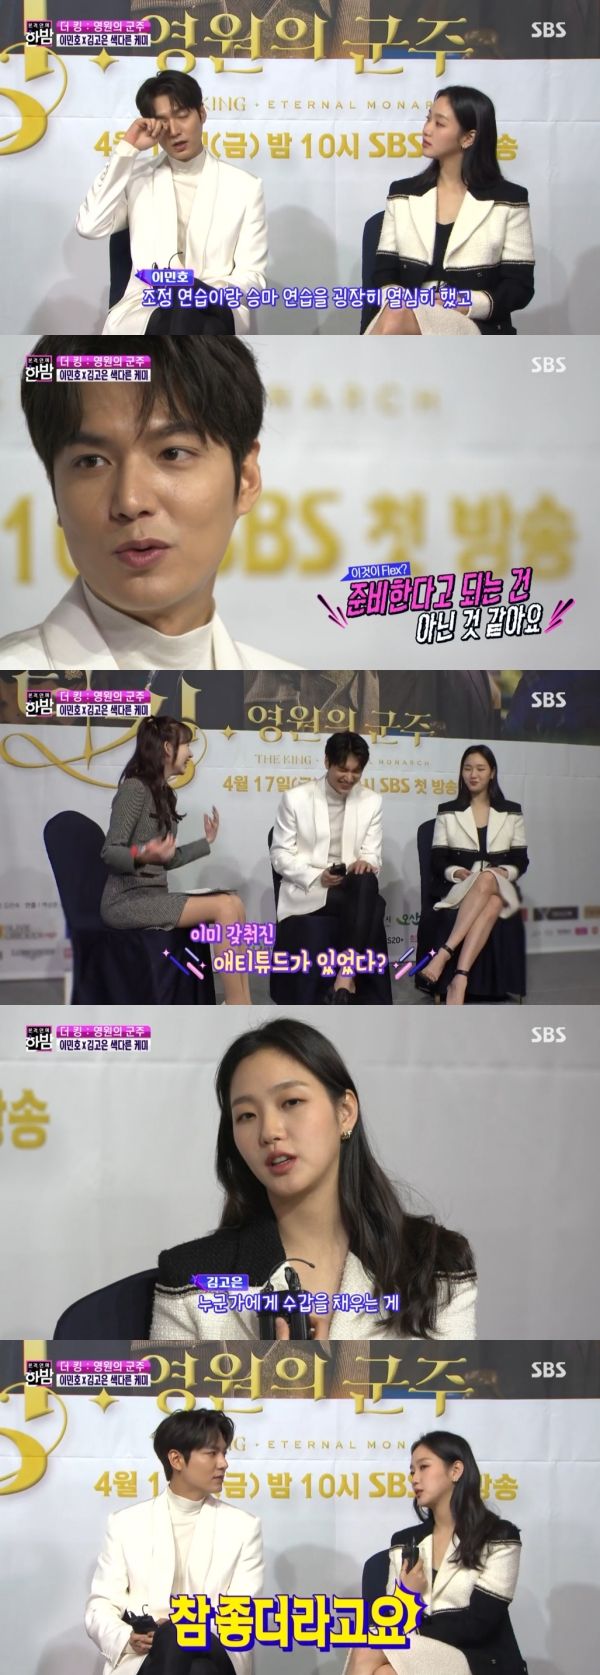 Lee Min-ho and Kim Go-eun introduced The KingOn SBSs Midnight (hereinafter referred to as Midnight), which aired on the 22nd, Lee Min-ho and Kim Go-eun introduced the drama The King that co-worked.Lee Min-ho introduced Drama The King on the day, saying, There are two worlds of Korea and the Korean Empire, and romance and melodrama that unfolds across parallel worlds.Regarding the role in the play, Lee Min-ho said, I worked hard on Adjust practice and horse riding practice.I do not think it is being prepared for the Emperor, he said, but said, It is the Emperor itself. As for the co-work with the horse Maximus, he expressed affection, saying, It is cute. I eat my favorite candy well. It is lemon flavor.Kim Go-eun also introduced the role playfully, It was nice to handcuff it, but it was mainly a chase role, but I followed it and handcuffed it and dragged it nicely.Kim Go-eun said of acting Action: Ive been shooting Action movies, so I was confident in my mind, nothing.I went to the Taekwondo gym in front of my house and worked hard. 